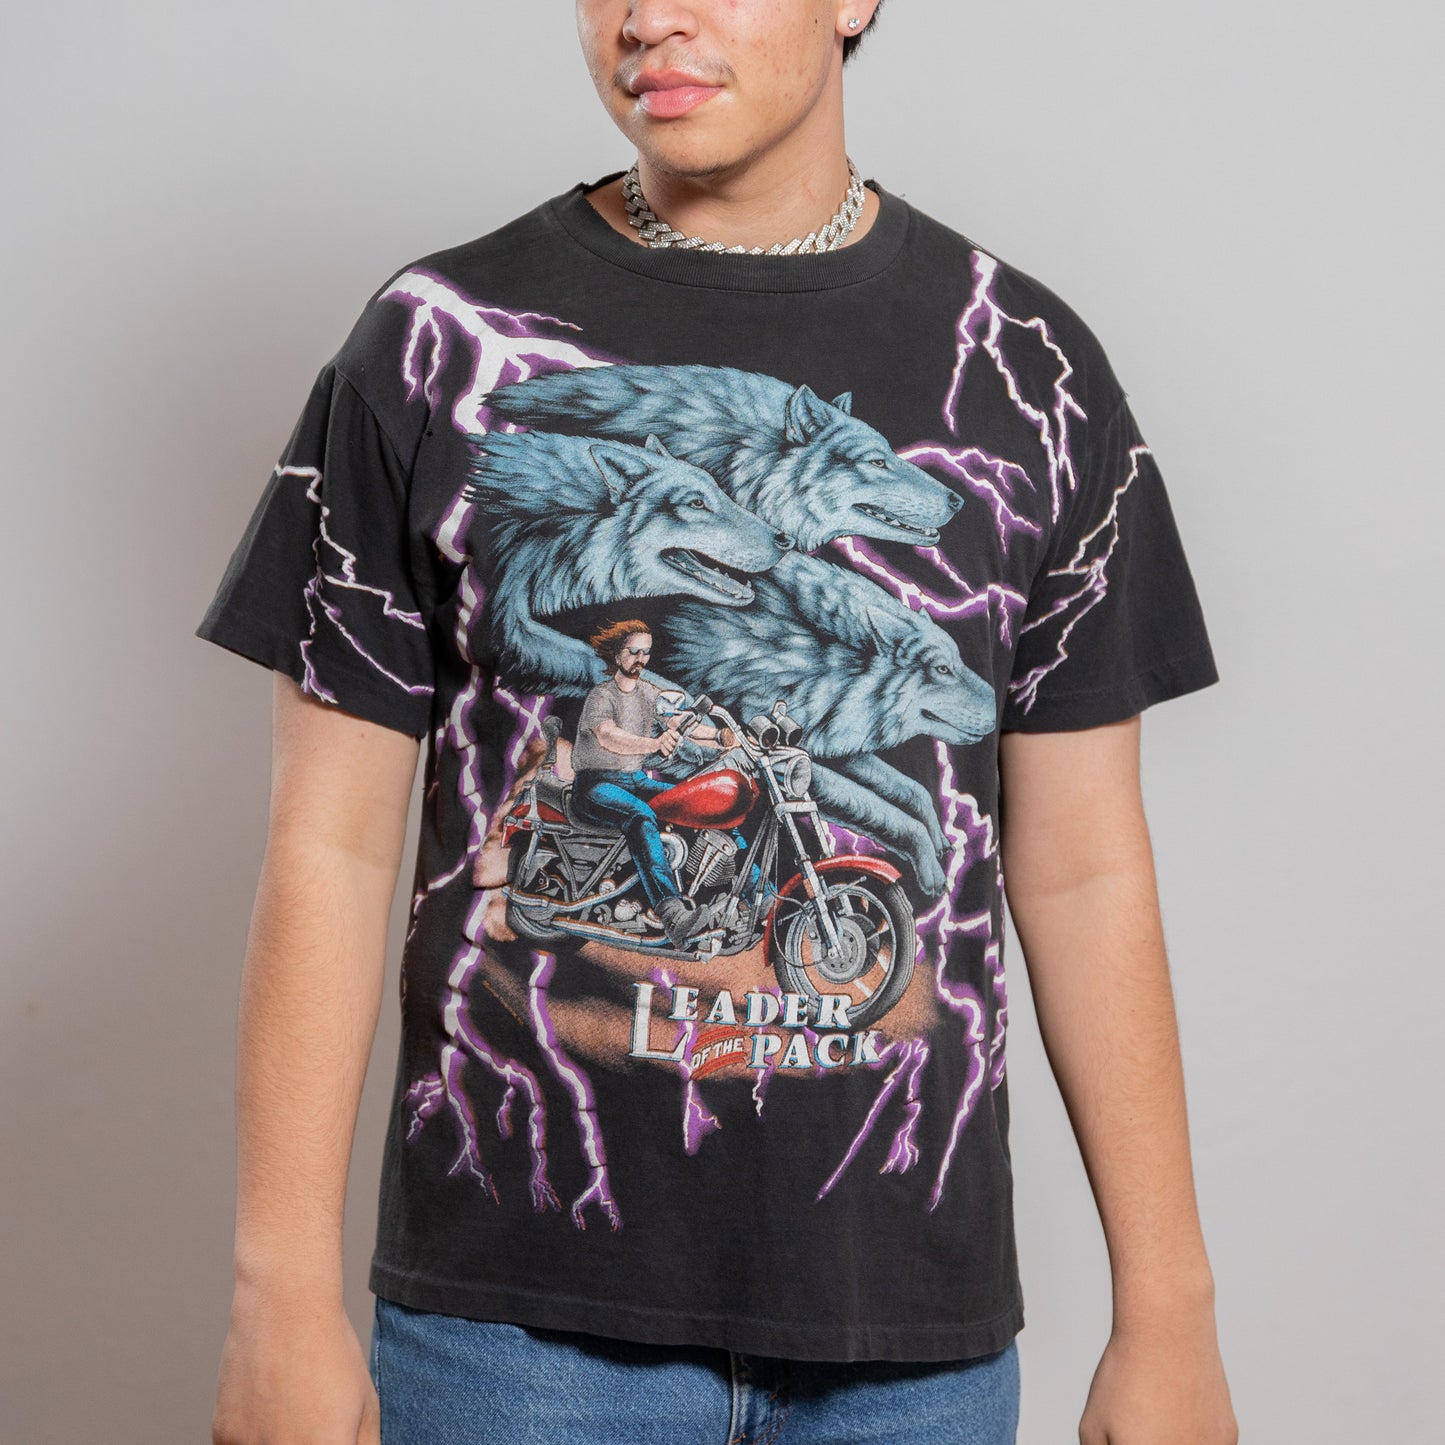 90s Leader Of The Pack American Thunder Tee